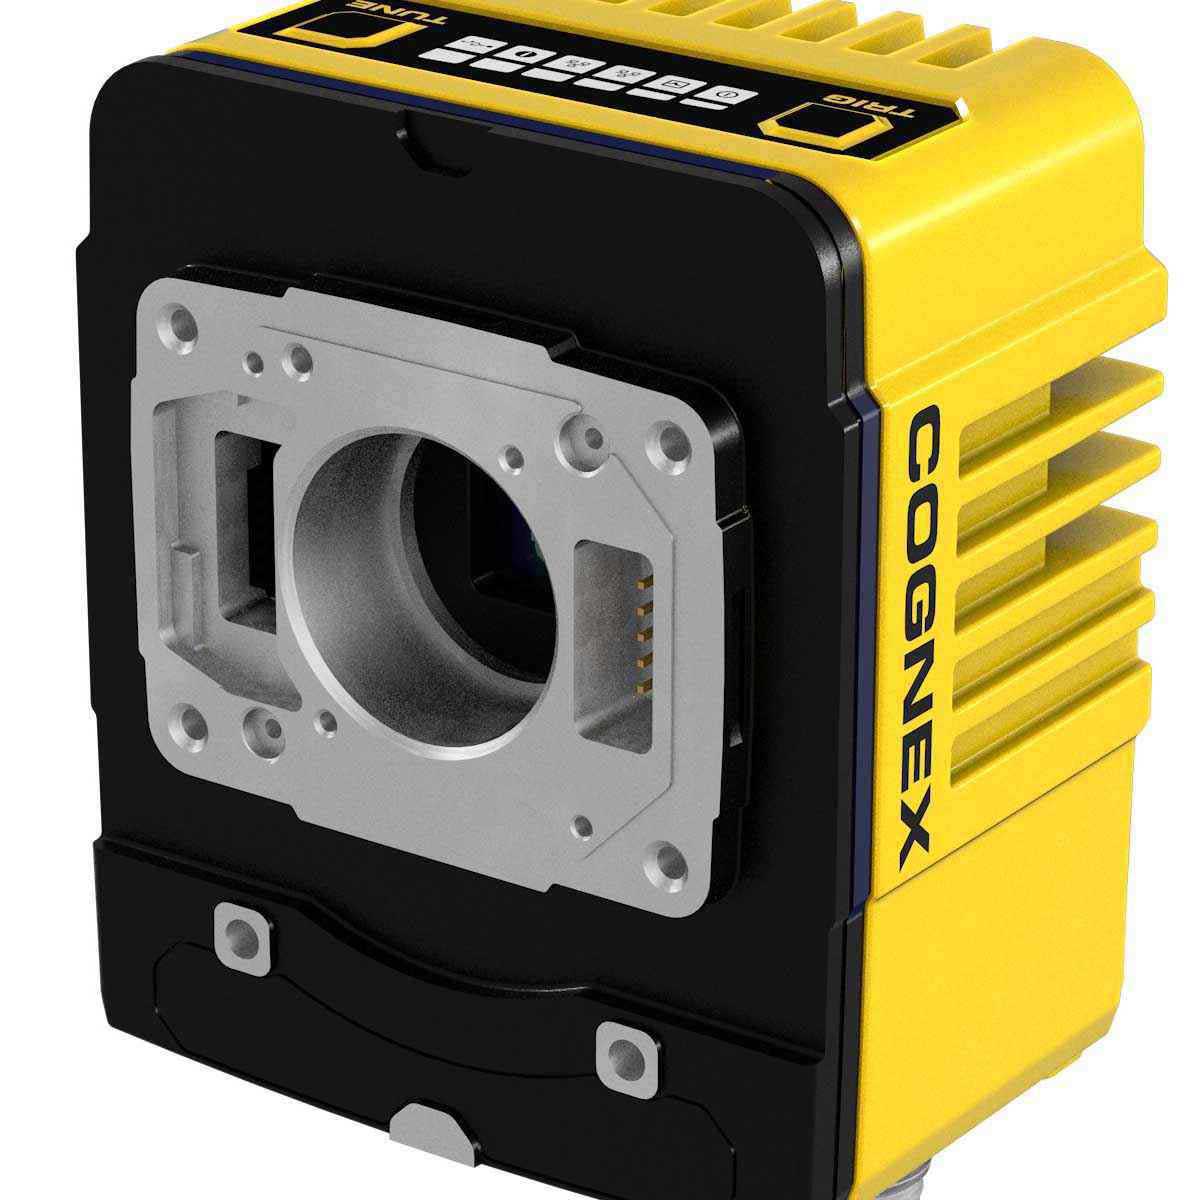 IS3801MS-00001-SR COGNEX IS3801MS 1.6MP Syst. Only Ru-Ba